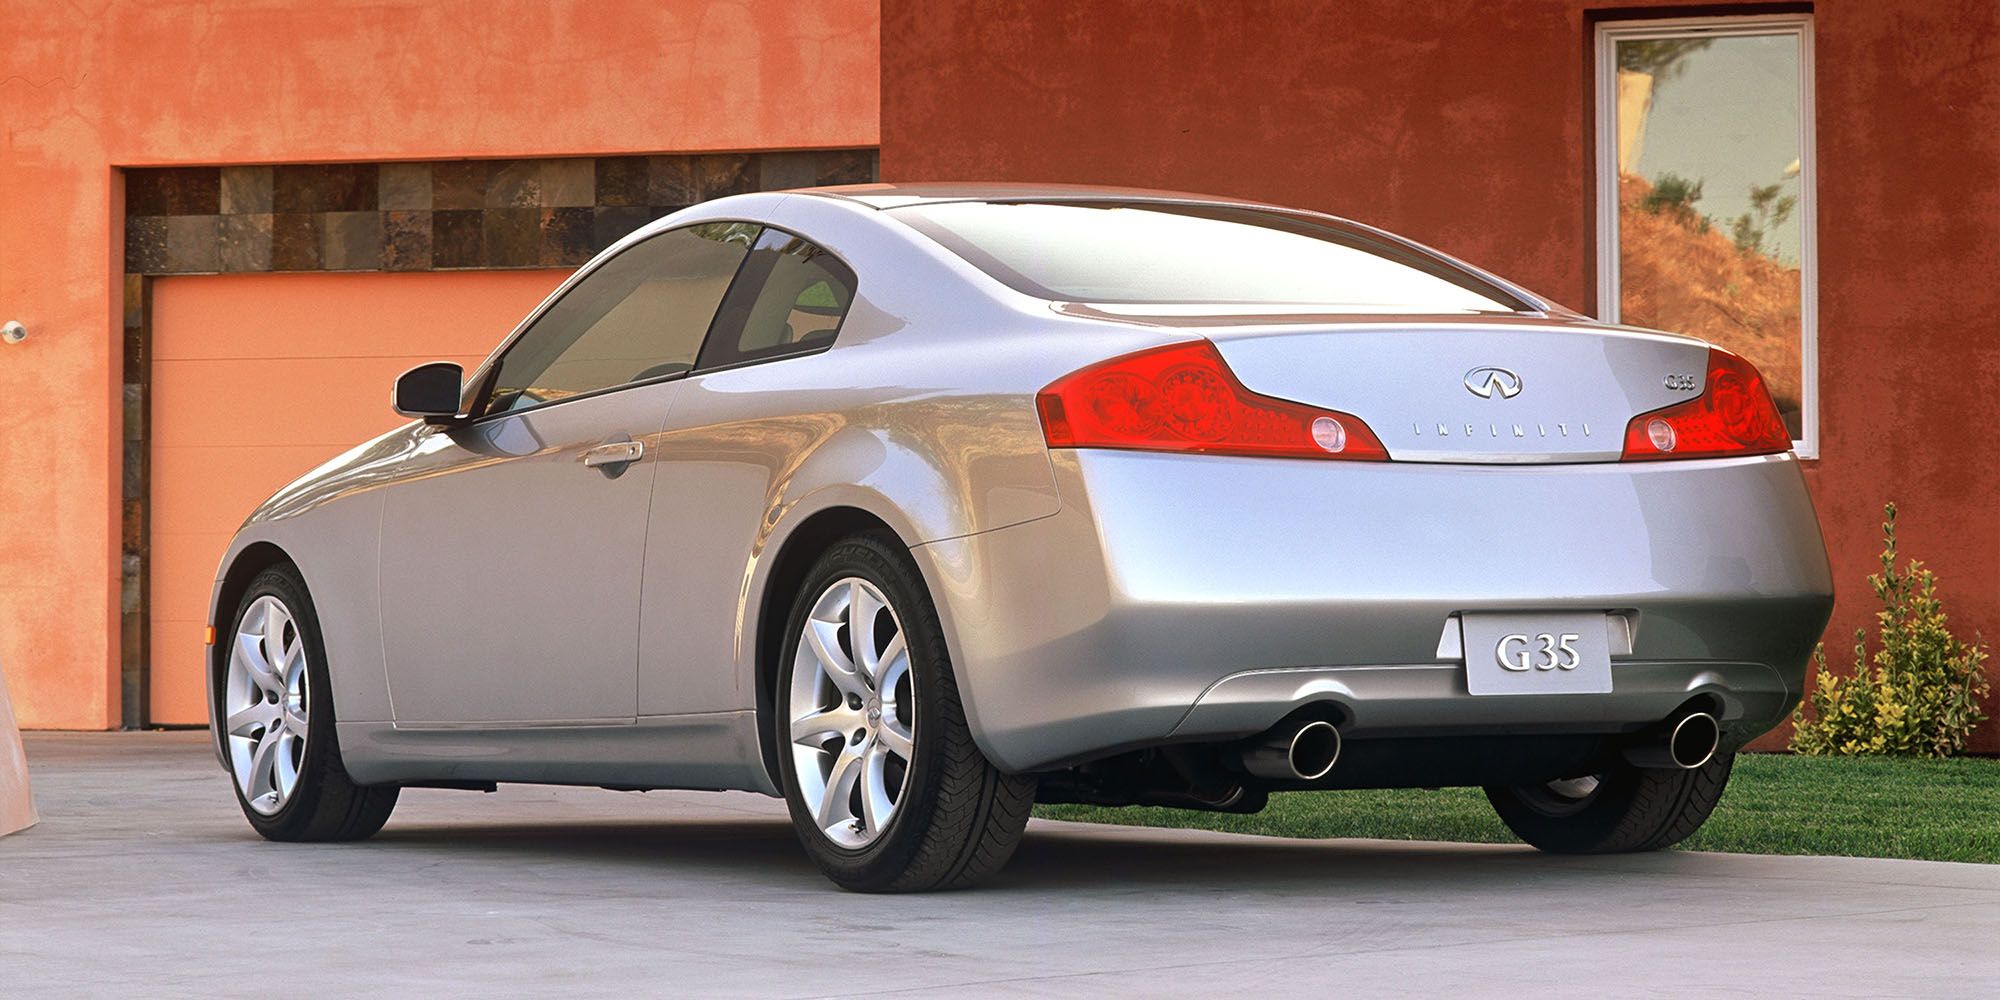 The rear of the G35